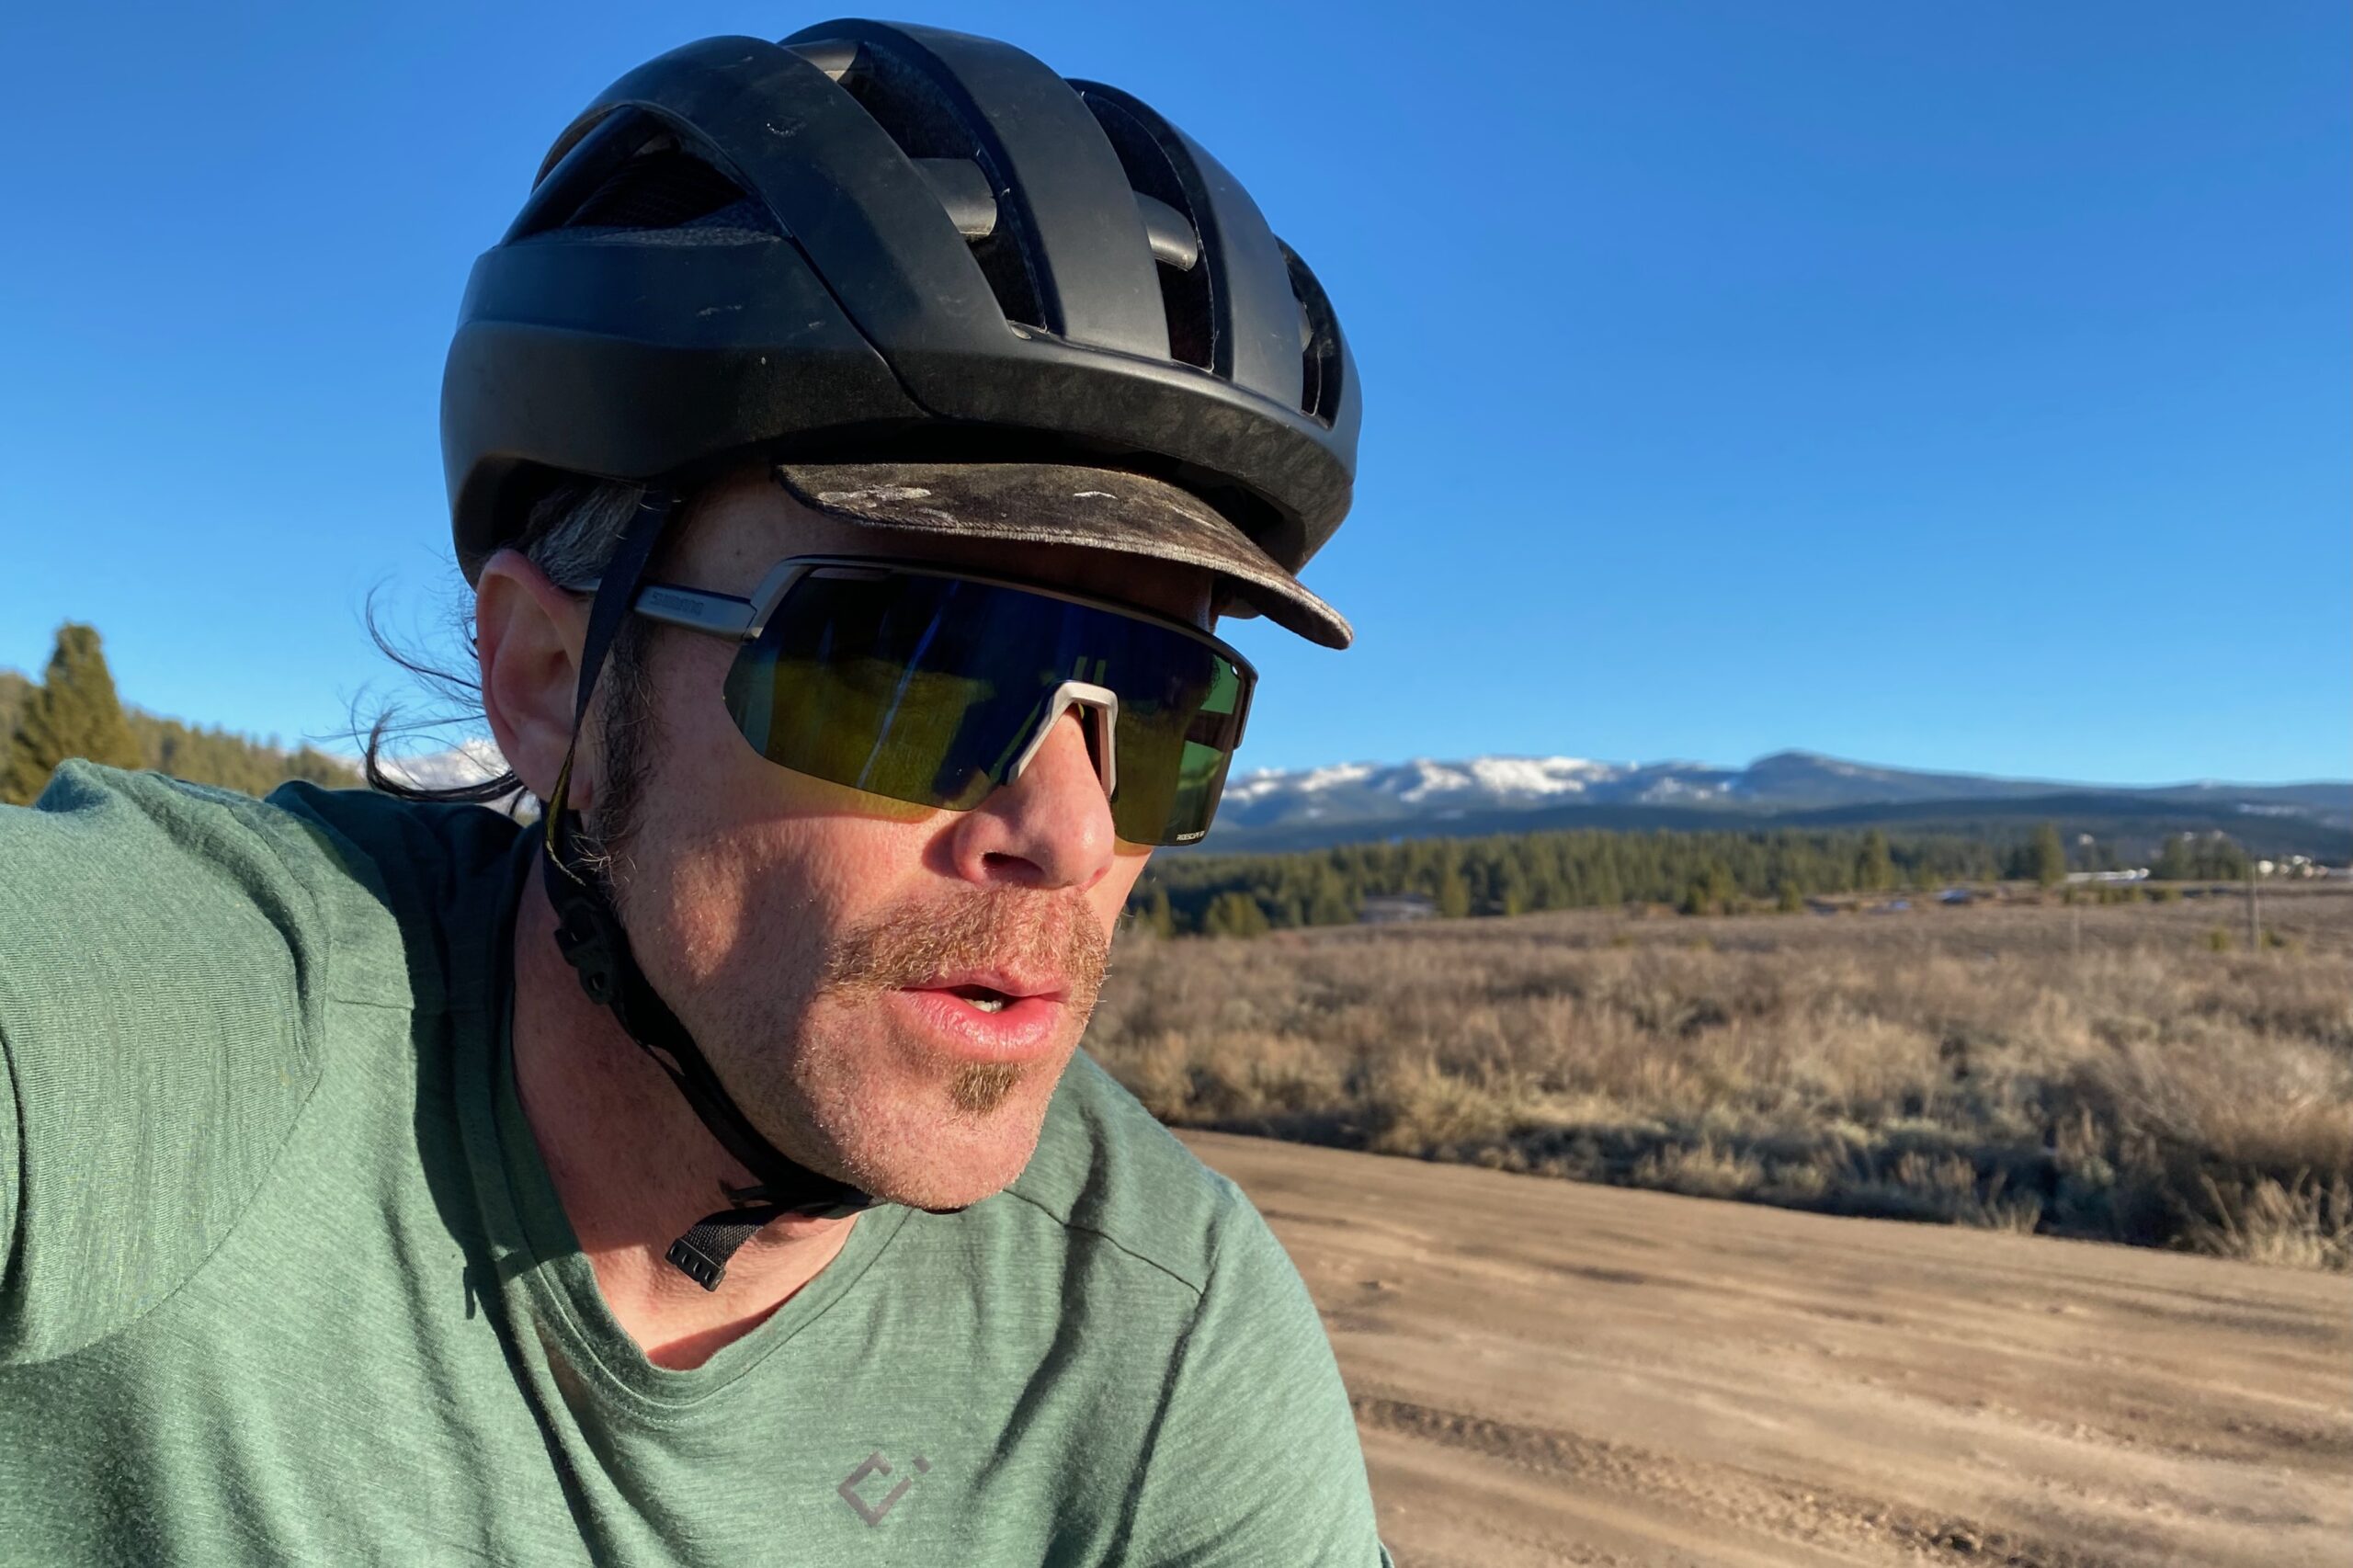 Riding in the Shimano Technium L sunglasses with the Ridescape GR lenses on a gravel bike.